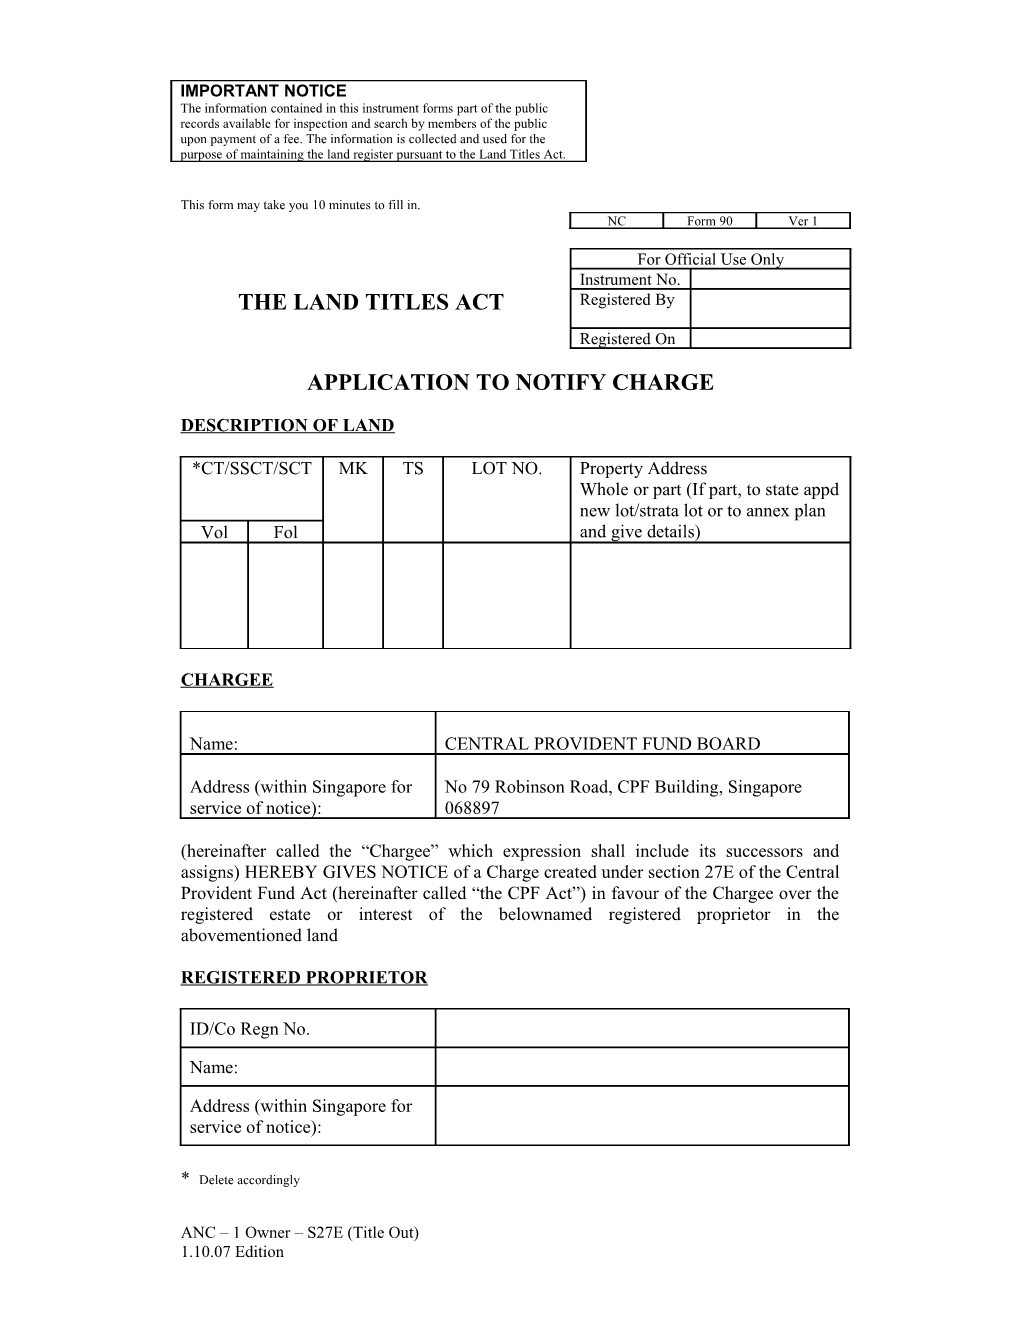 Form 90 (Title Out)